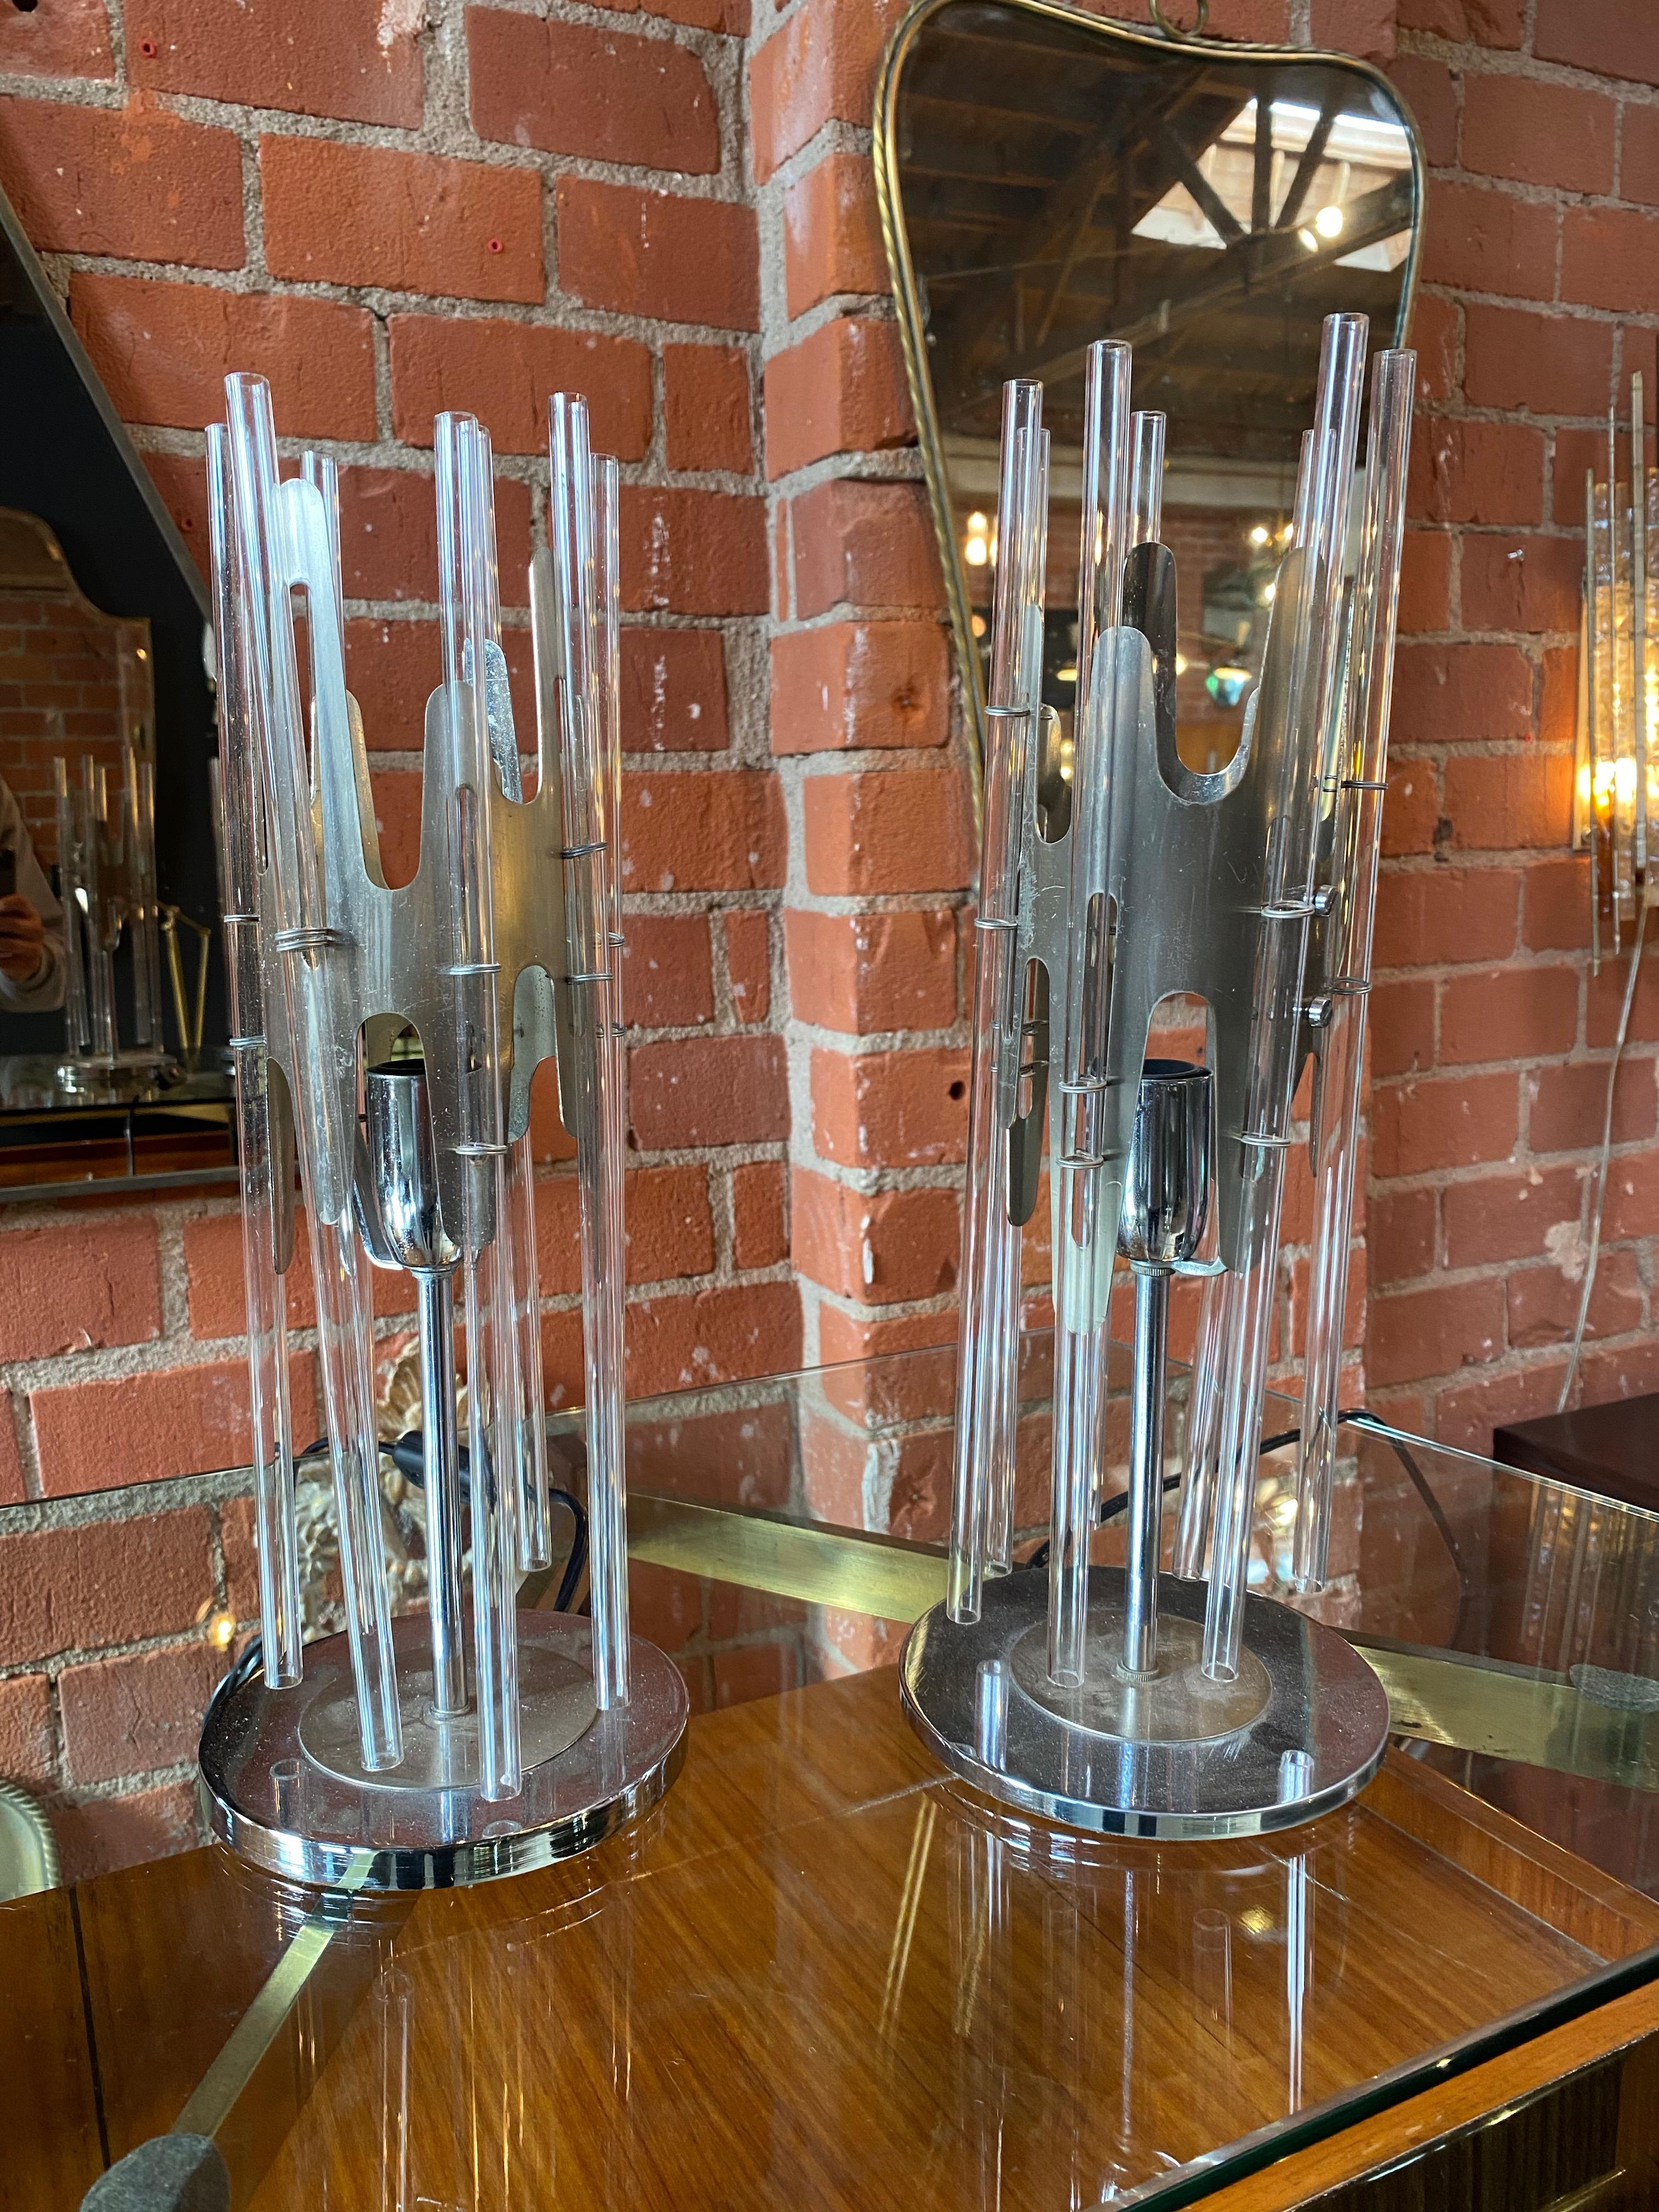 Sciolari pair of modern cylindrical glass and chrome table lamps, Italy, 1970s
The chrome finish of the handcrafted fence-like frame splendidly complements the surface of the lampshade in 7 transparent tubular glasses in these stunning table